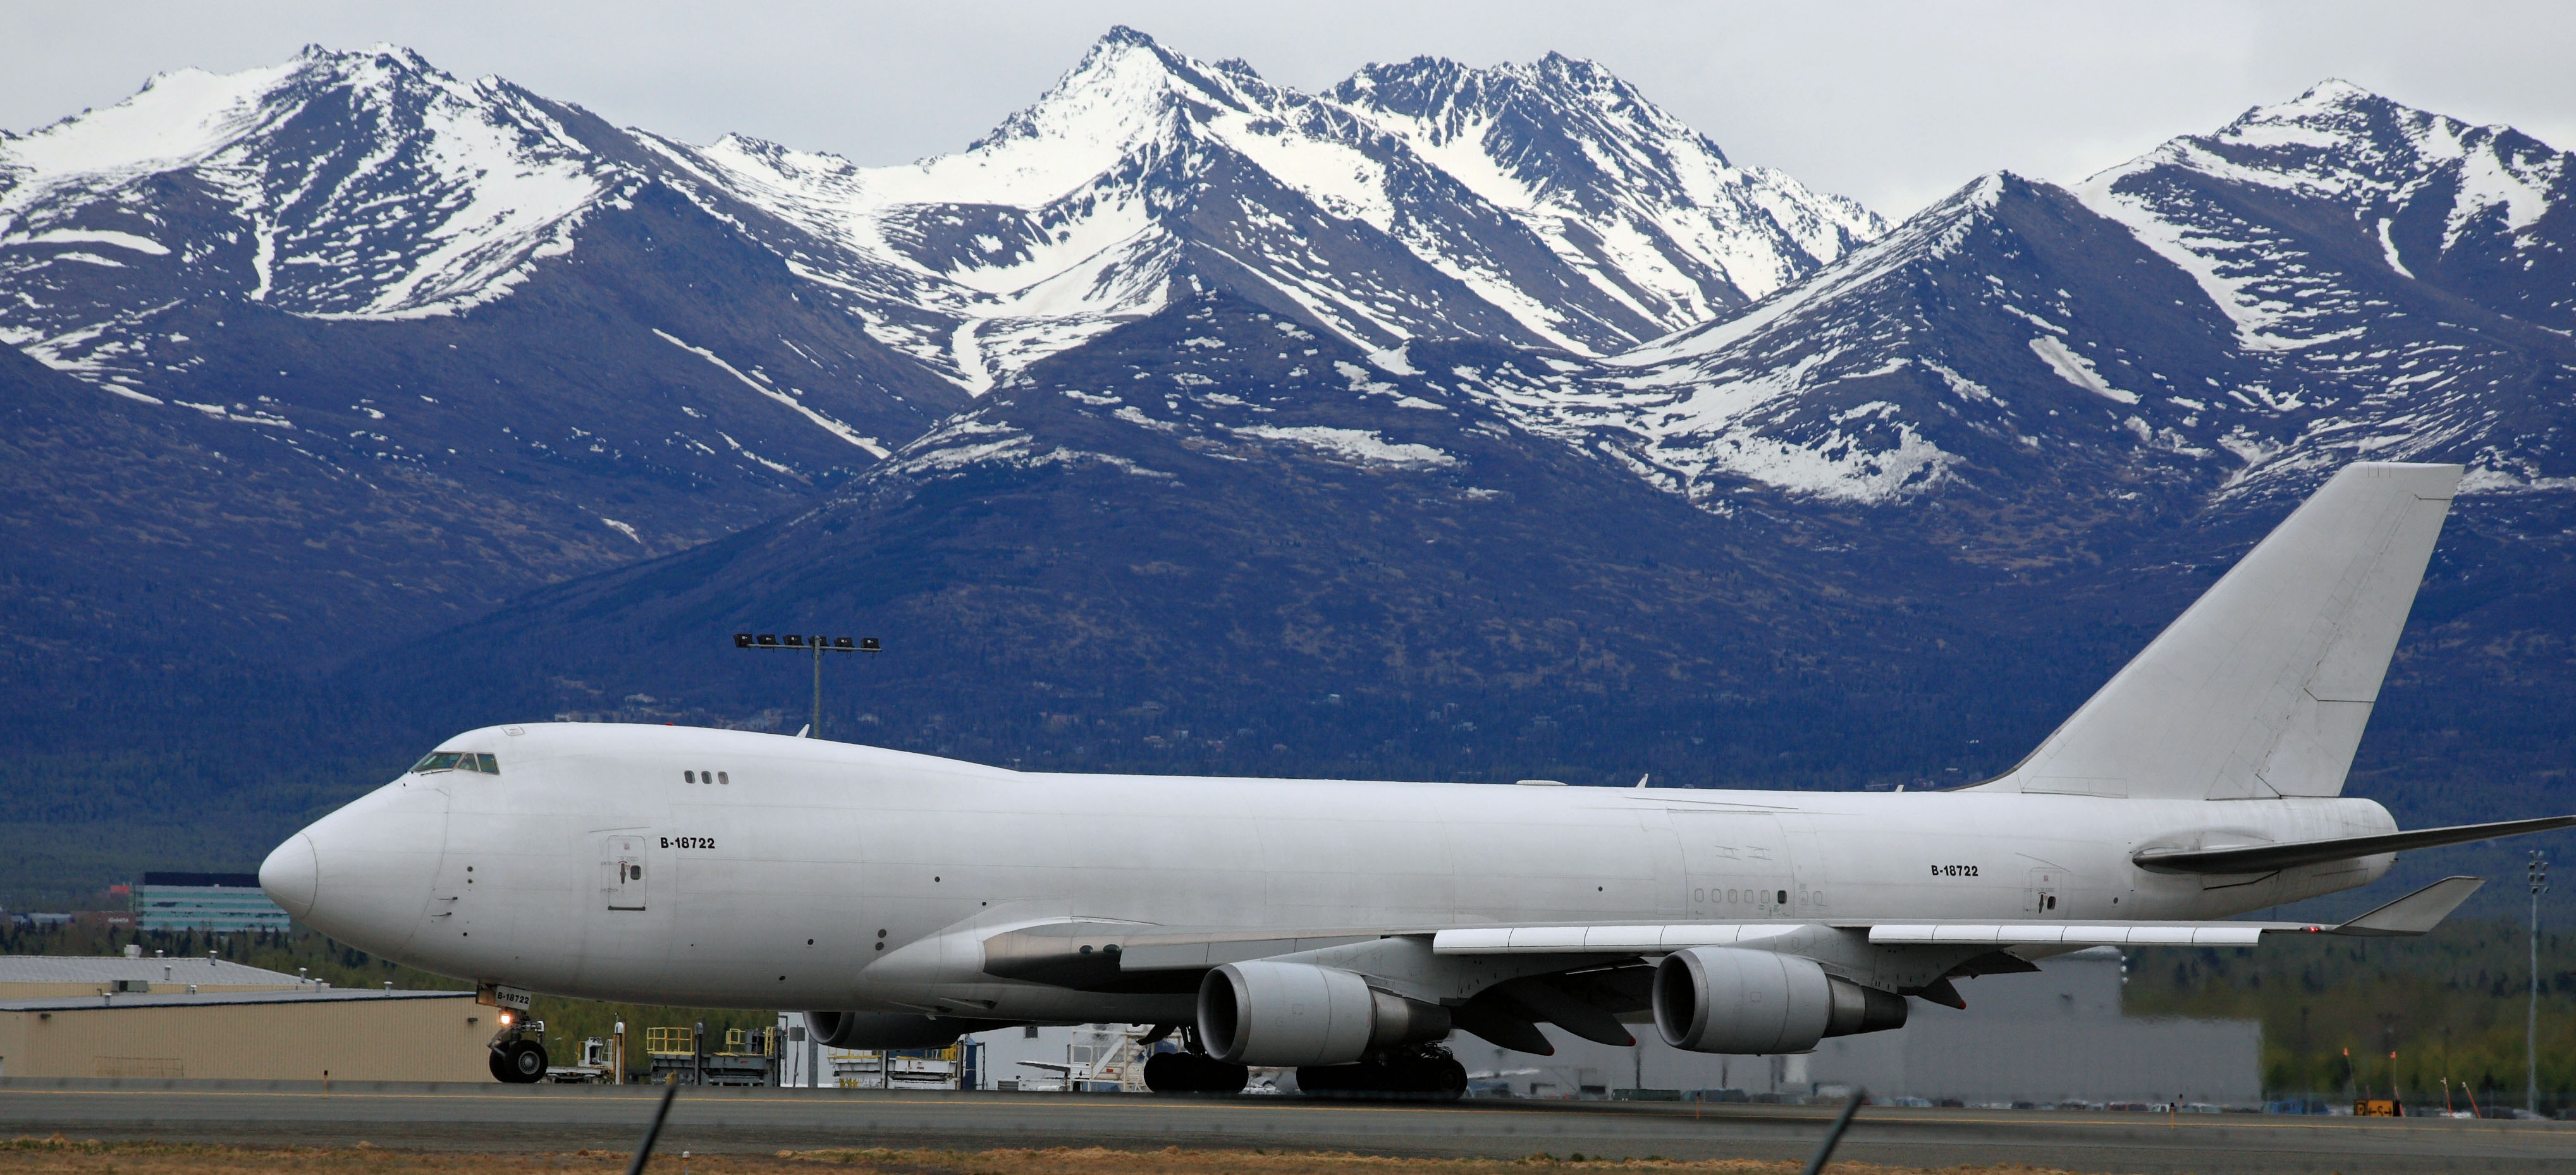 File:White tail 747 with the Chugach Mountains in the background ...